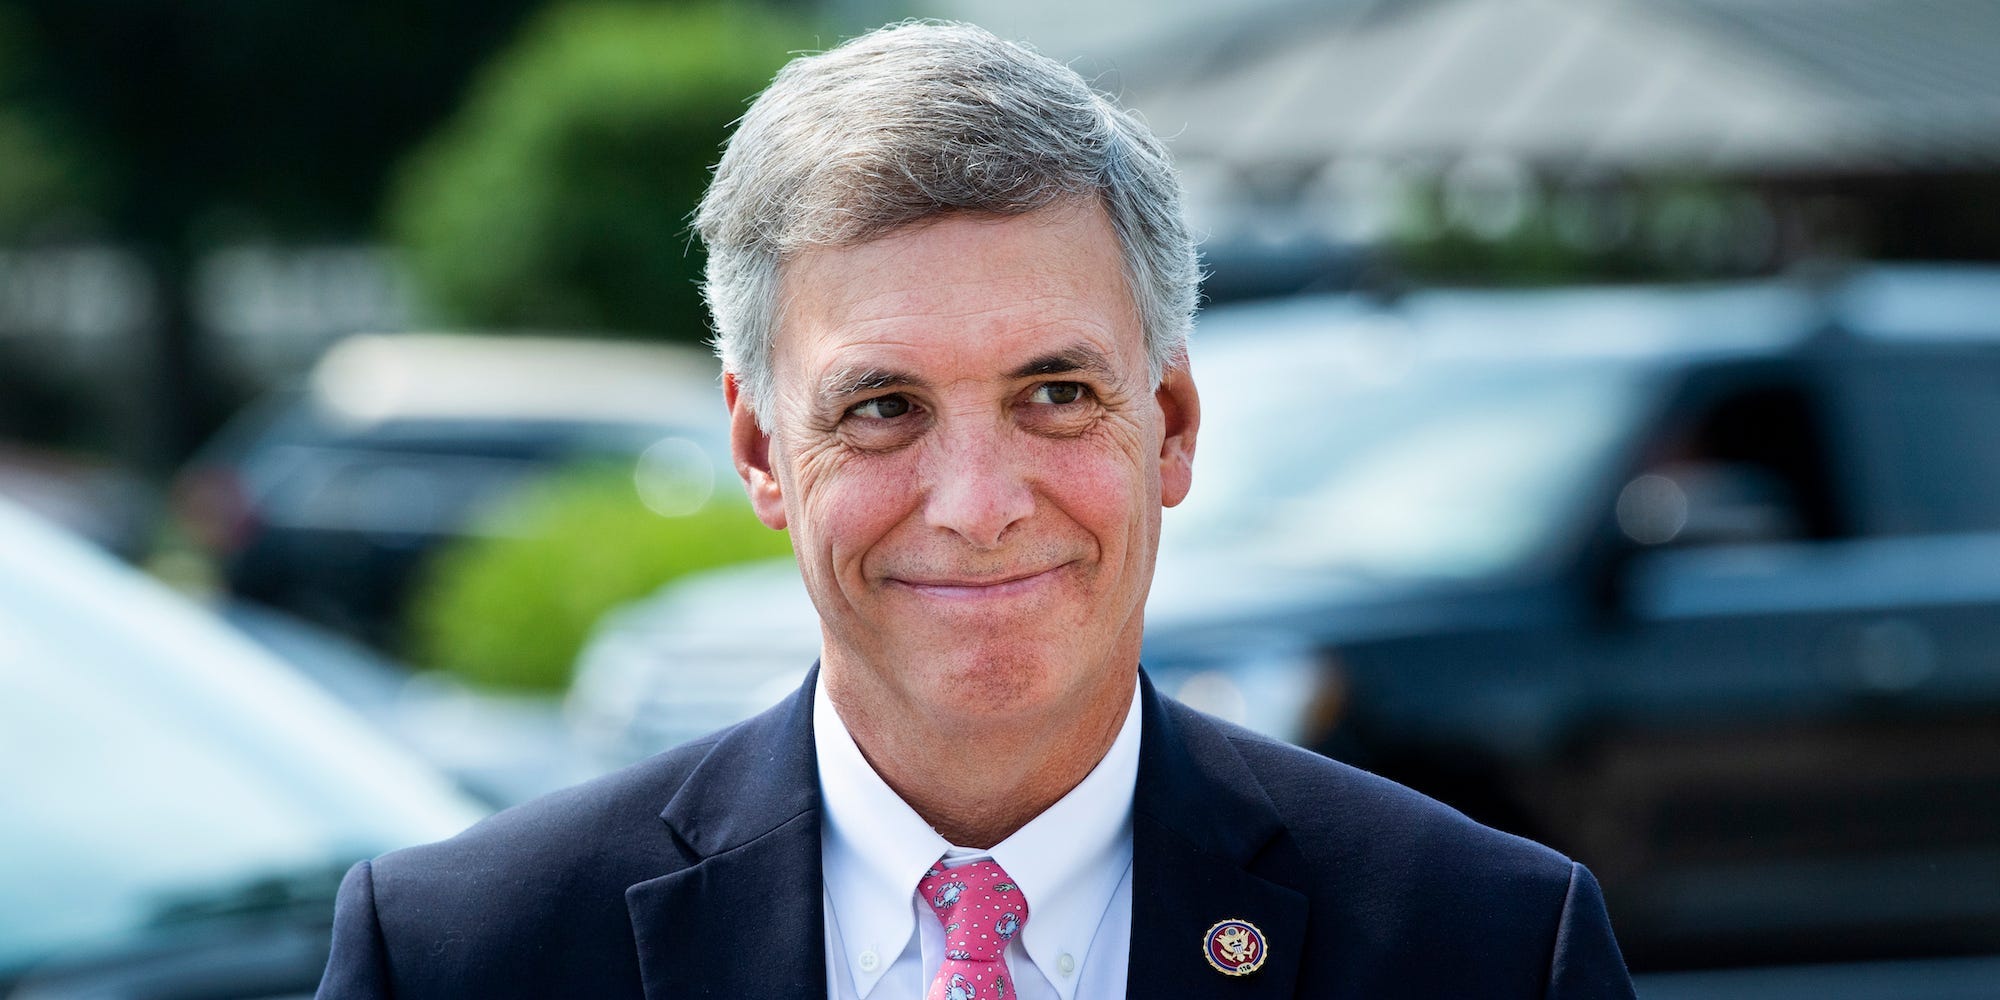 Republican Rep. Tom Rice of South Carolina outside the Capitol on May 20, 2021.